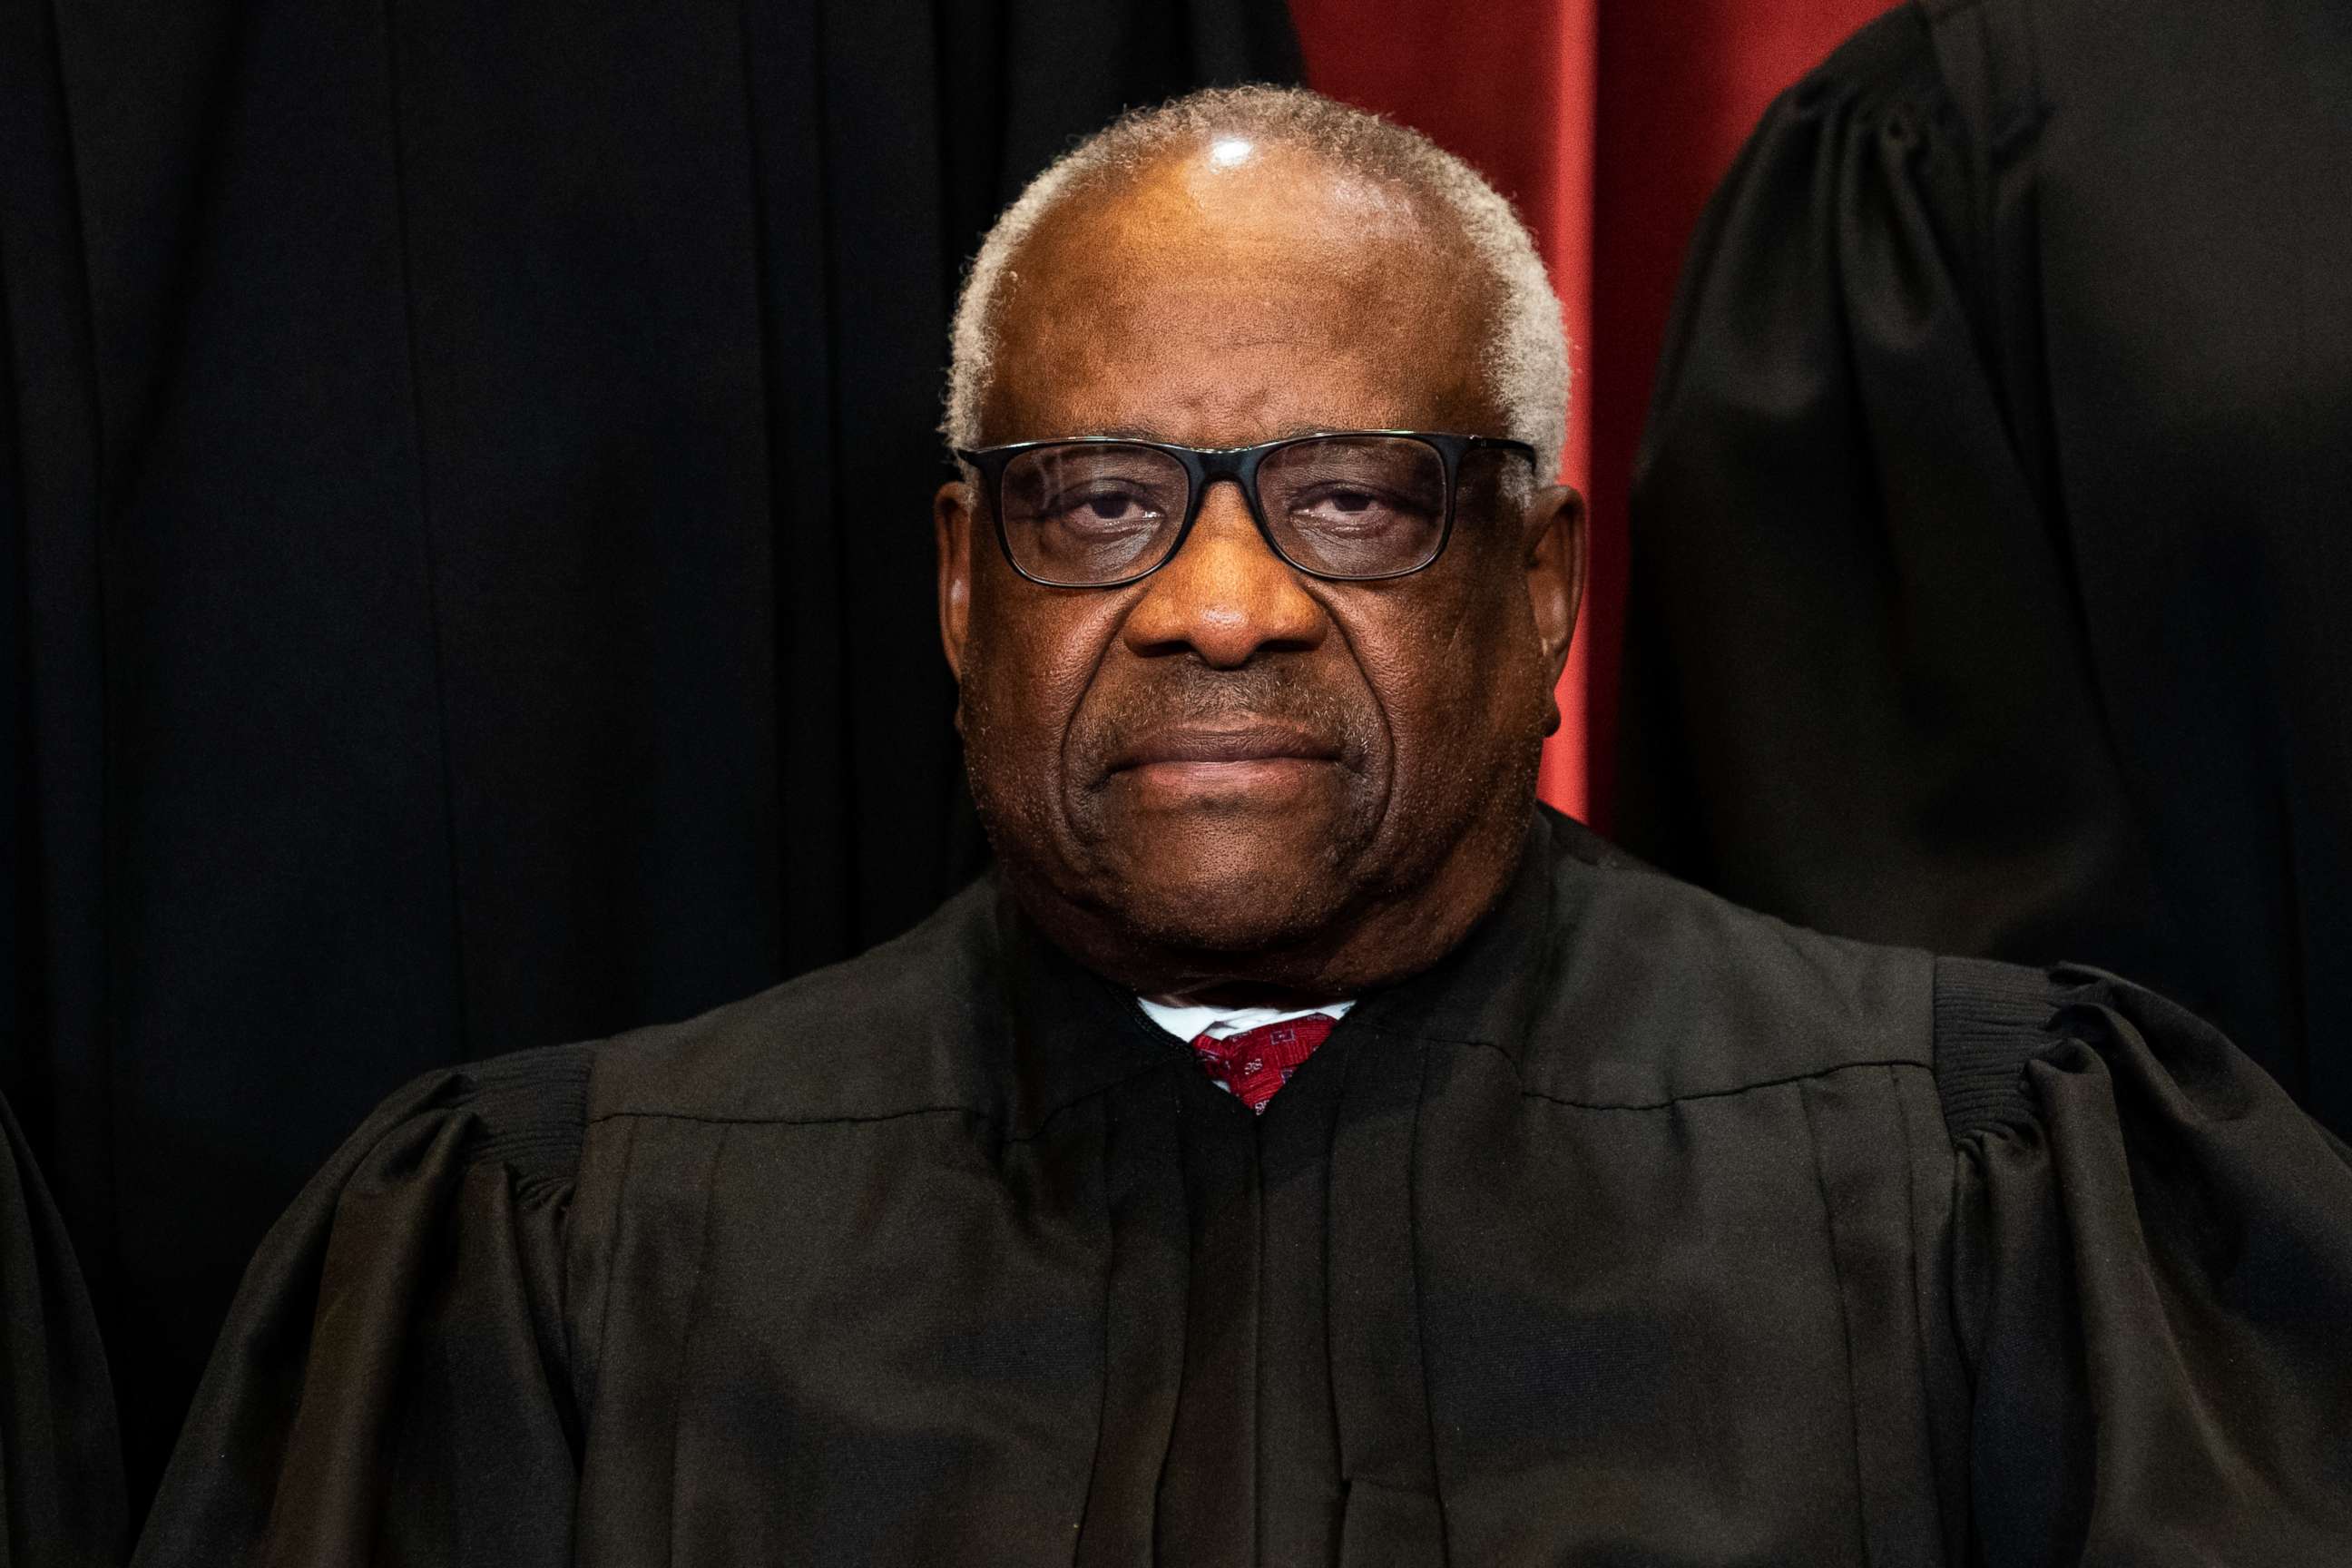 PHOTO: Clarence Thomas, associate justice of the U.S. Supreme Court, during the formal group photograph at the Supreme Court in Washington, D.C., April 23, 2021.